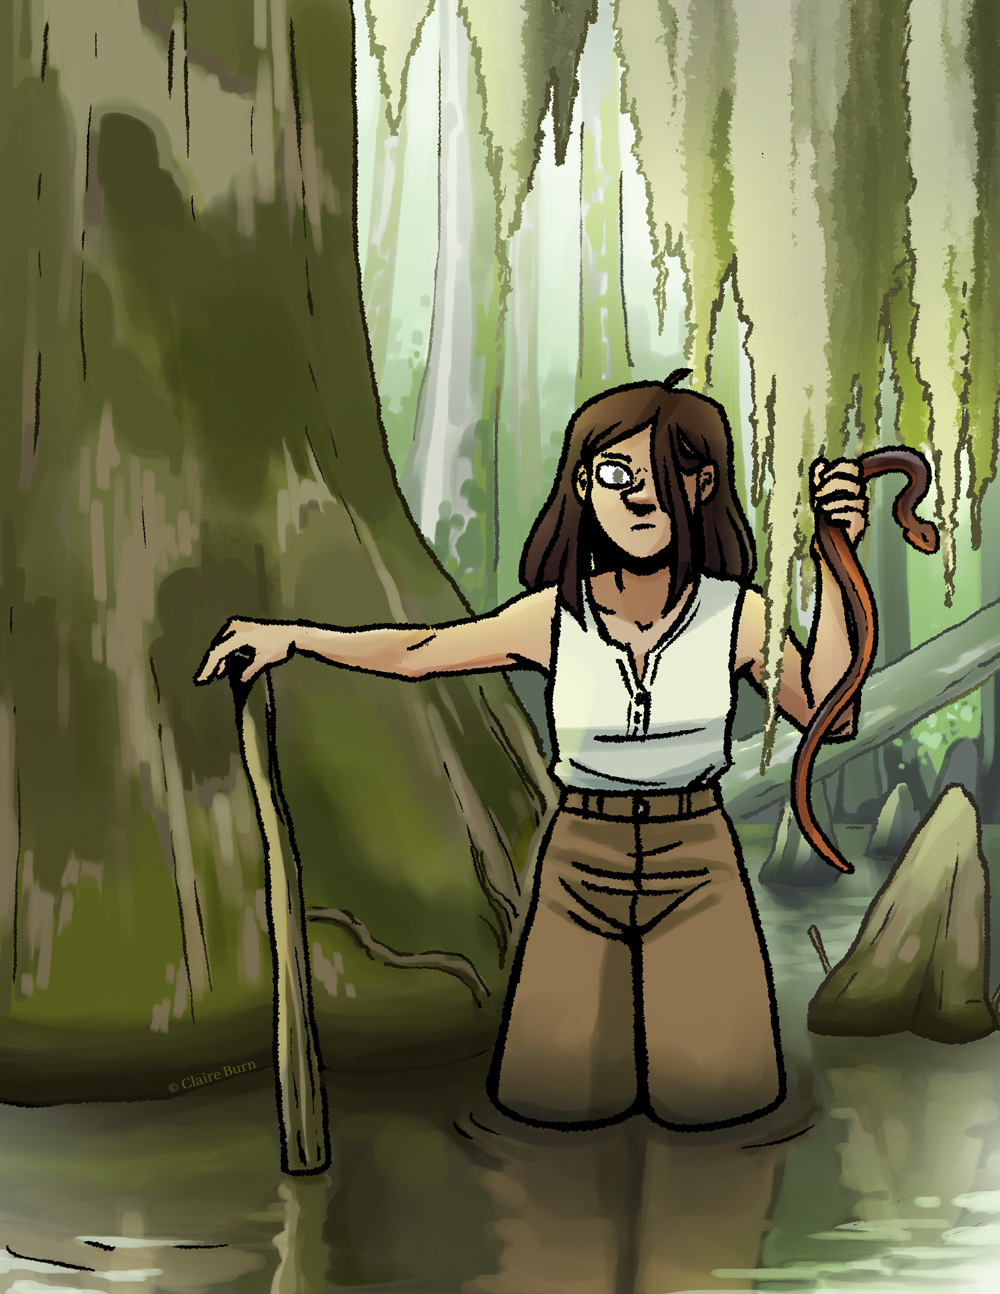 A girl stands in a cypress swamp, looking at the viewer while holding a snake in her left hand.